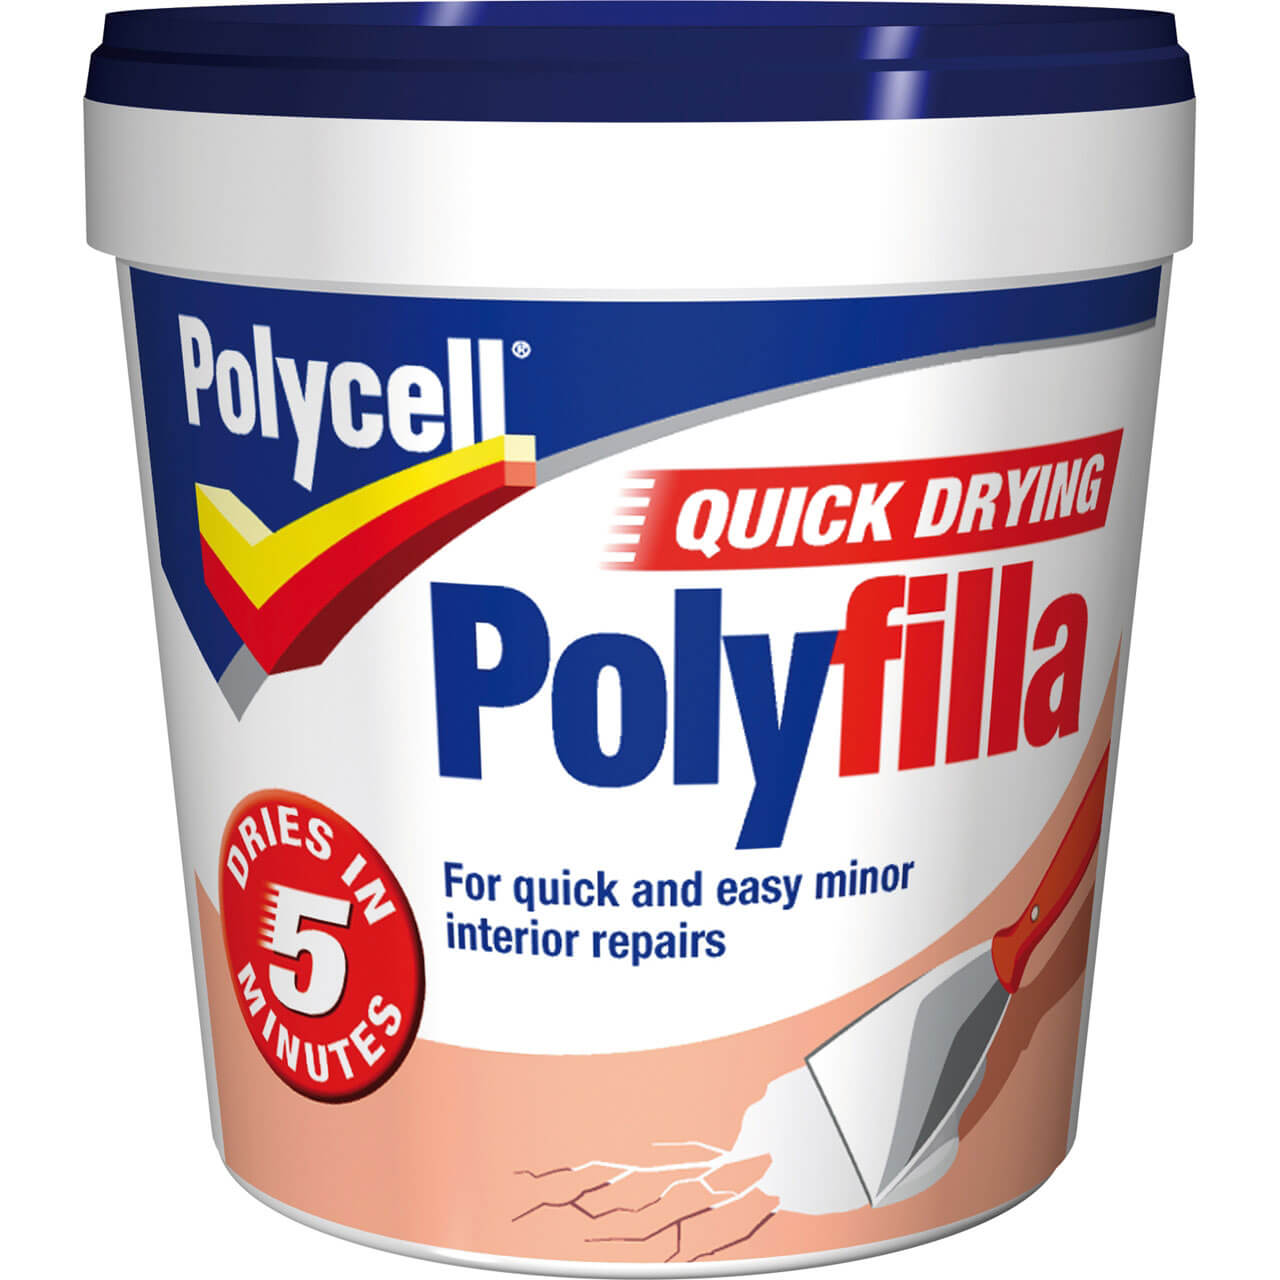 Photo of Polycell Multi Purpose Quick Drying Polyfilla Tub 1000g